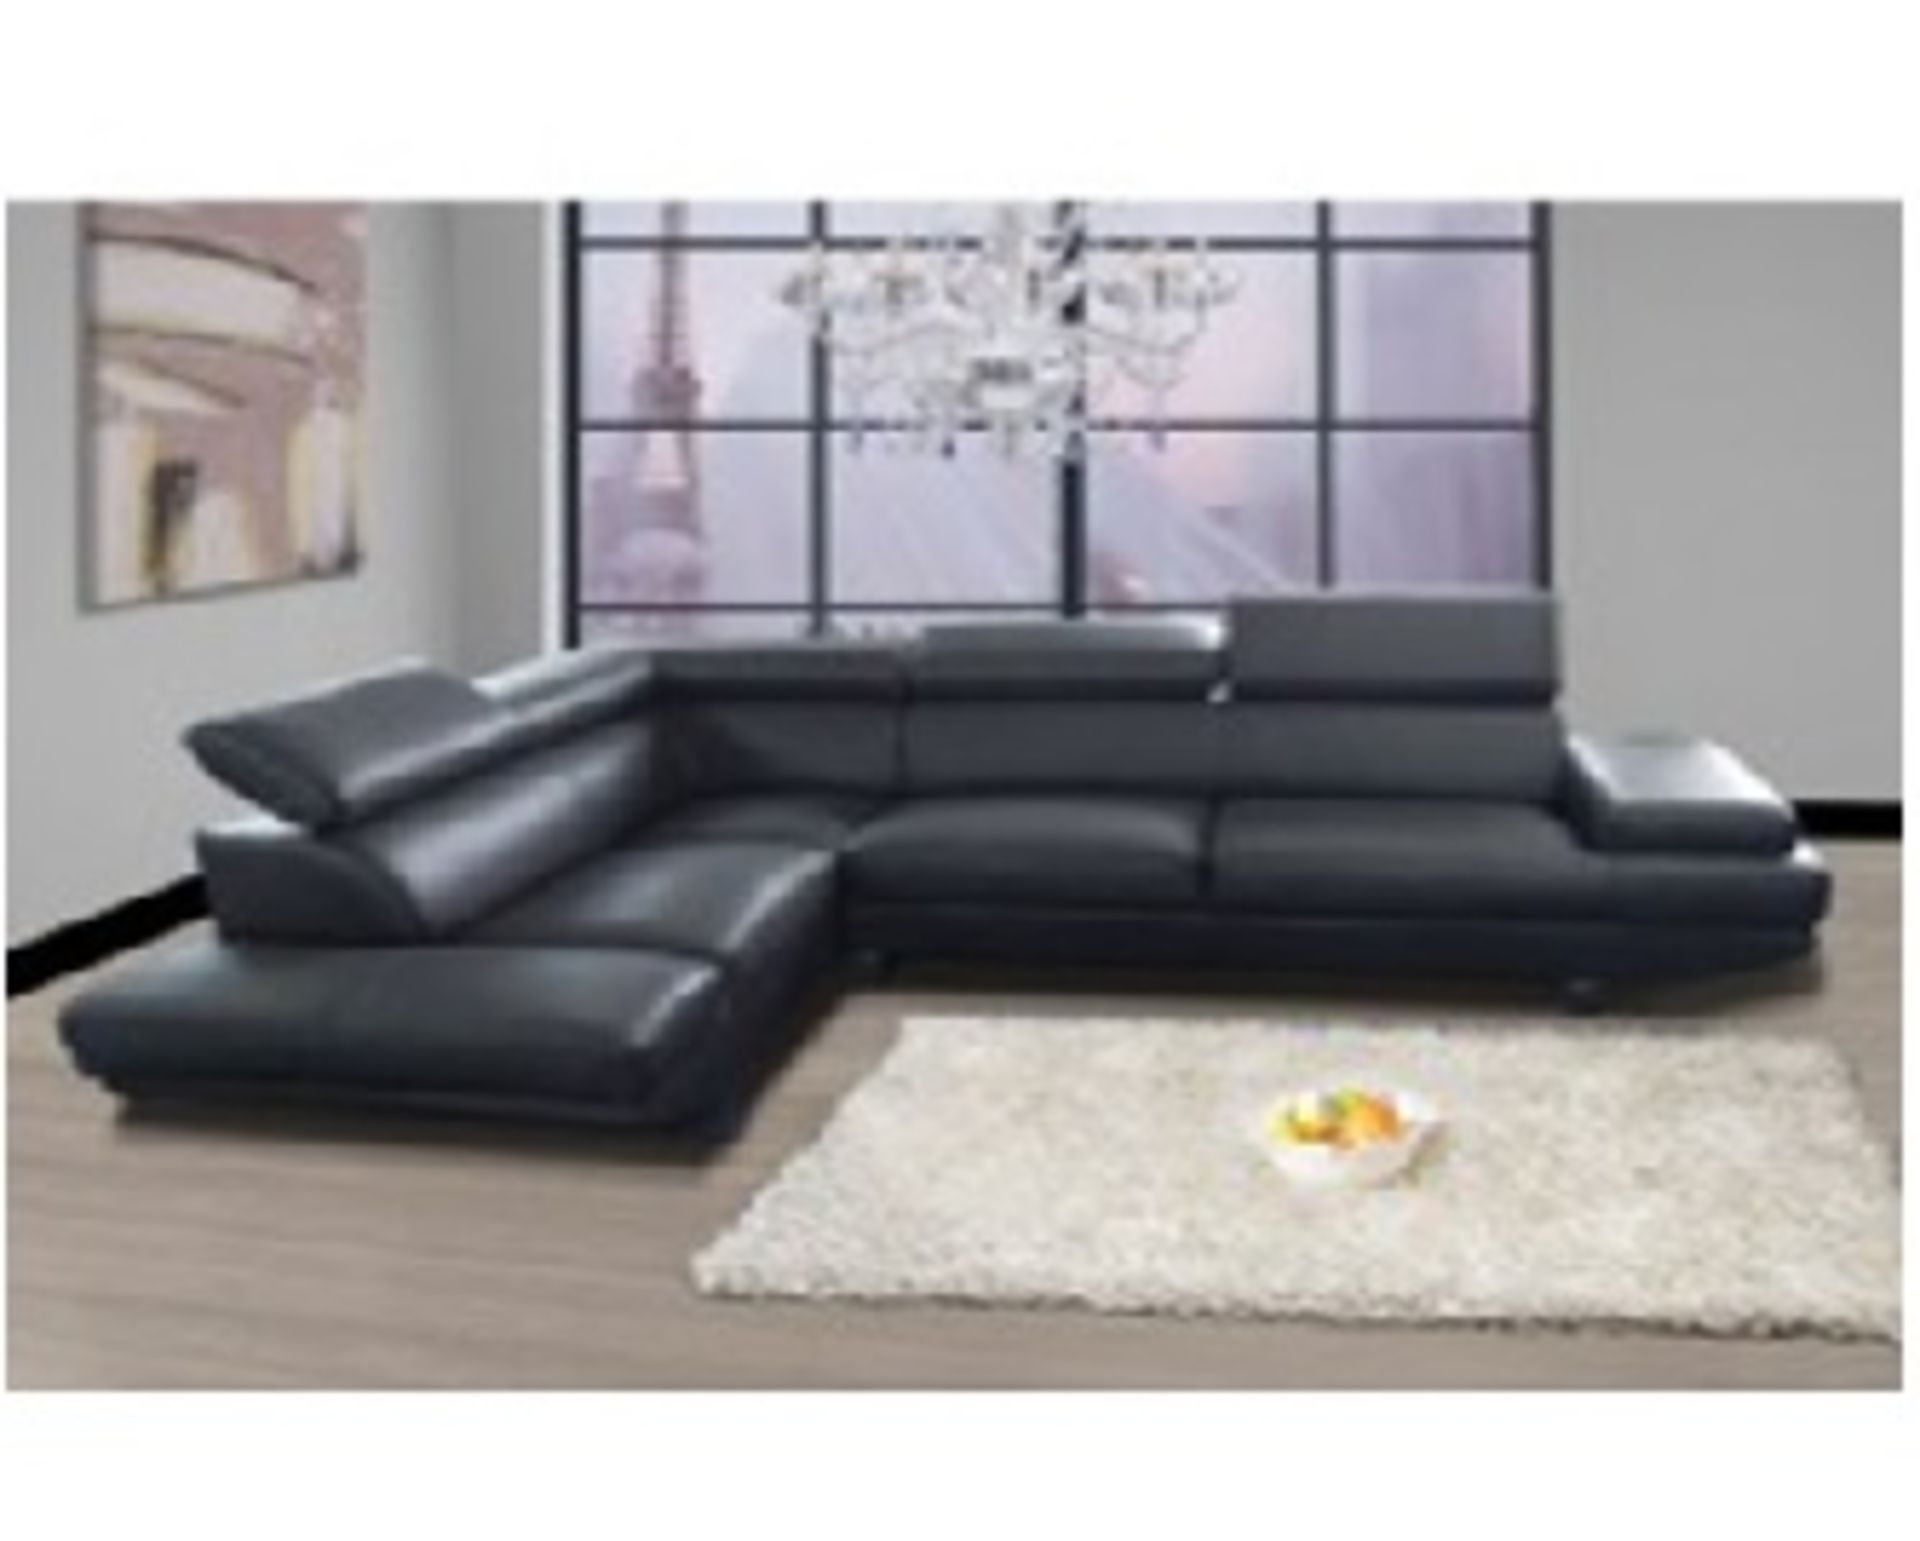 1 x Brown Bonded Leather Corner Sofa - SFS007 (Brand New & Boxed)